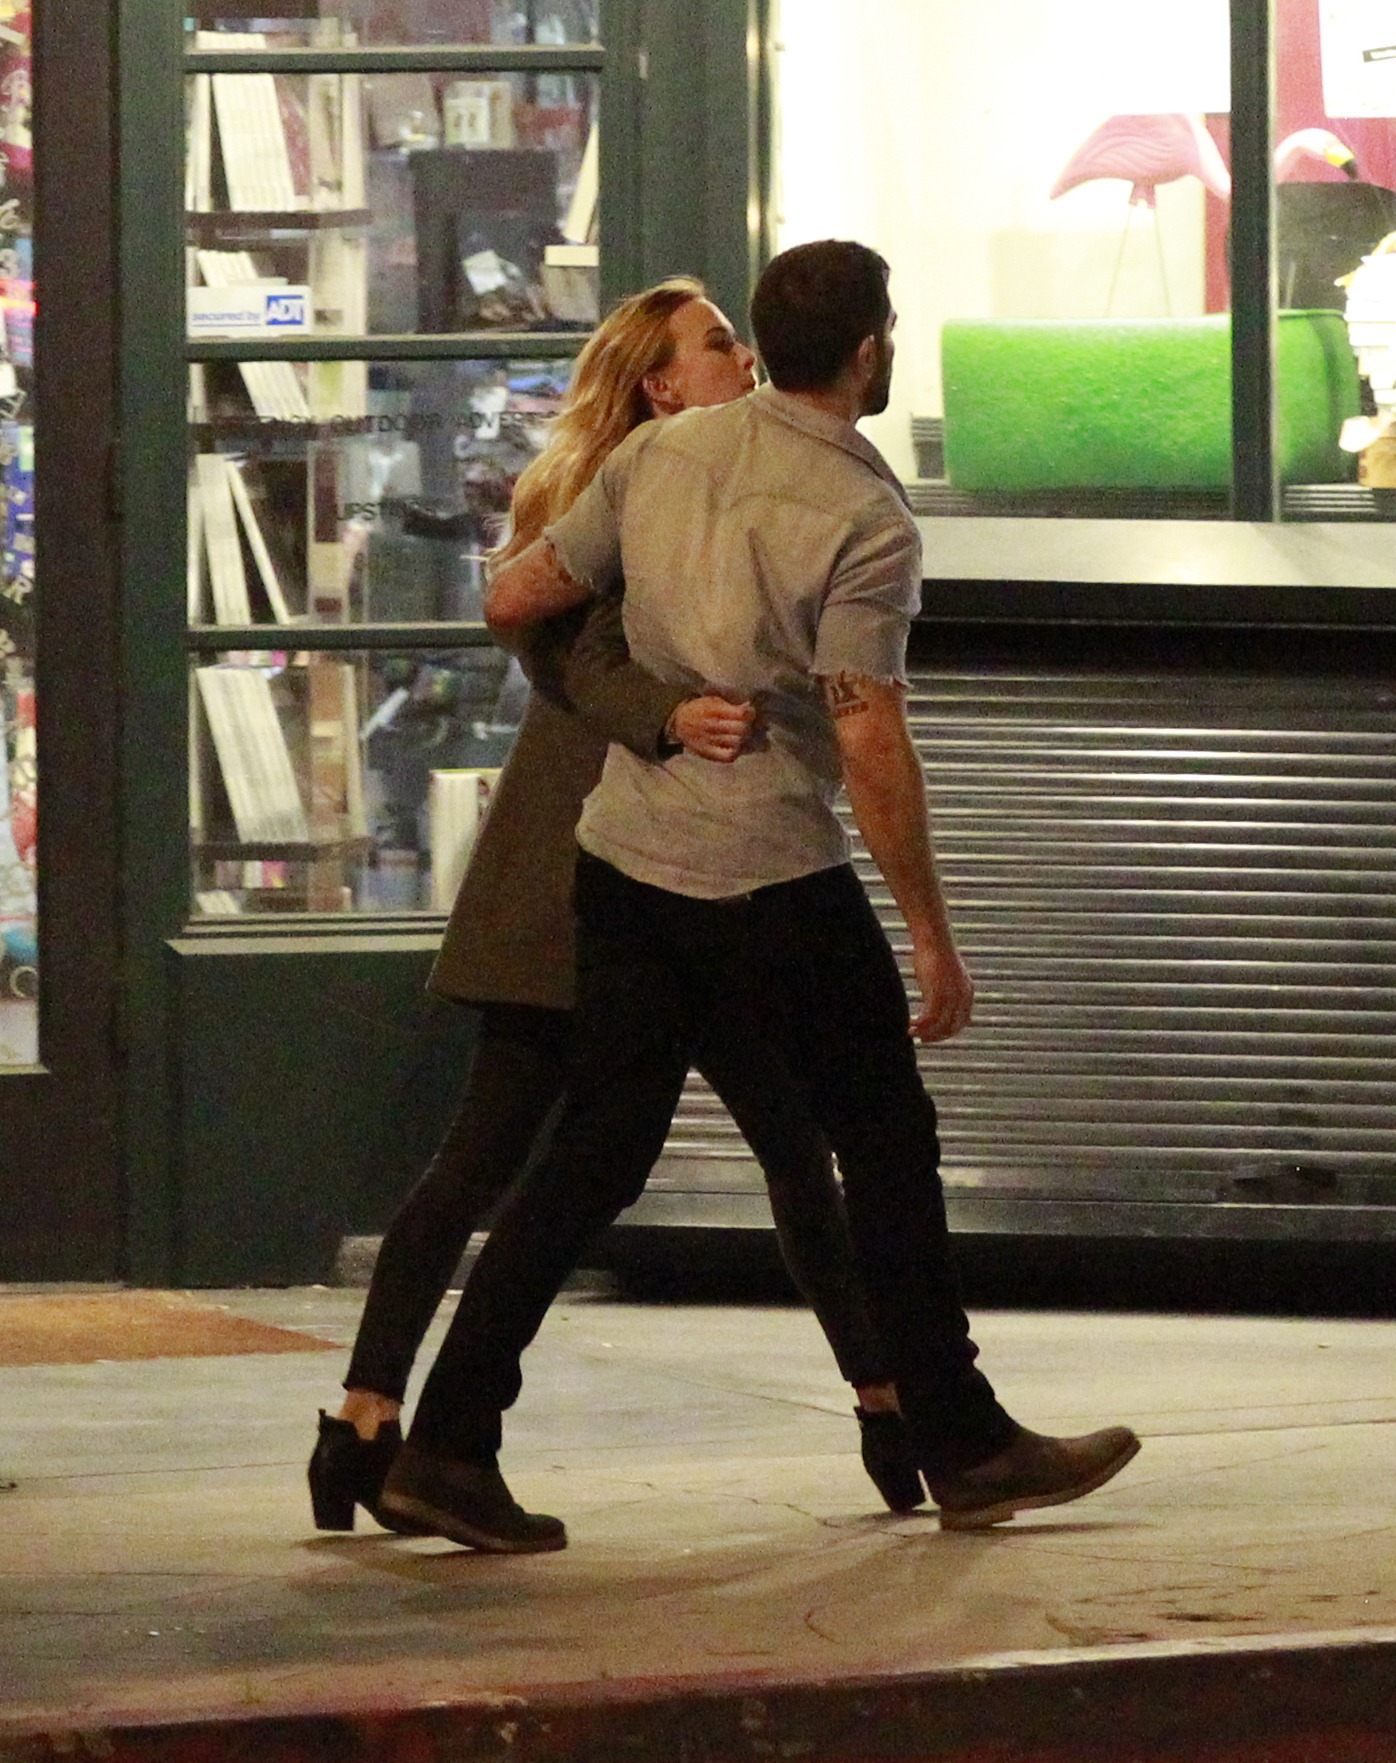 01/20/2020 EXCLUSIVE: Jesse Metcalfe Packs on the PDA with Australian actress Jade Albany in Los Angeles. The sighting comes after the 41 year old actor who is currently engaged to actress Cara Santana was spotted earlier in the day getting very close to Hungarian supermodel Livia Pillmann.



 **VIDEO AVAILABLE**, Image: 494262647, License: Rights-managed, Restrictions: Exclusive NO usage without agreed price and terms. Please contact sales@theimagedirect.com, Model Release: no, Credit line: TheImageDirect.com / The Image Direct / Profimedia